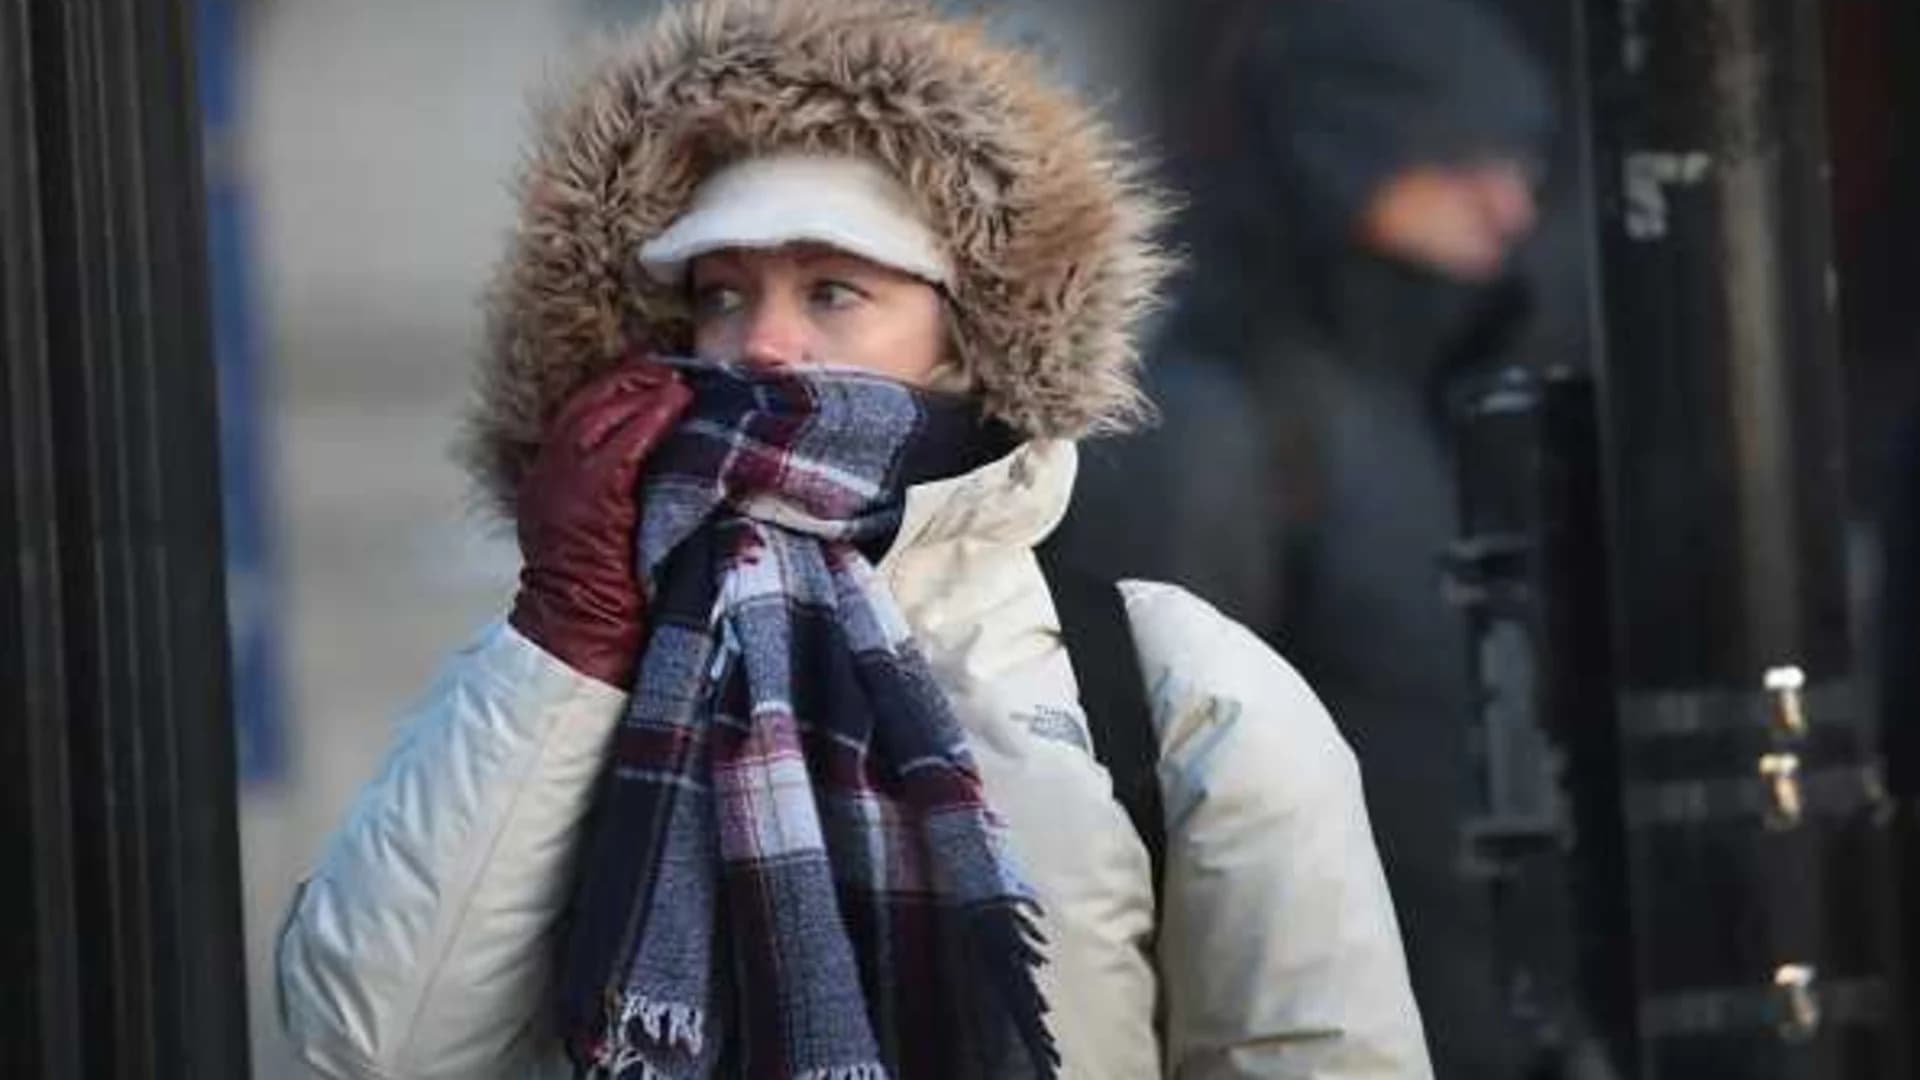 Forecast: Temps rise above freezing mark with clear skies